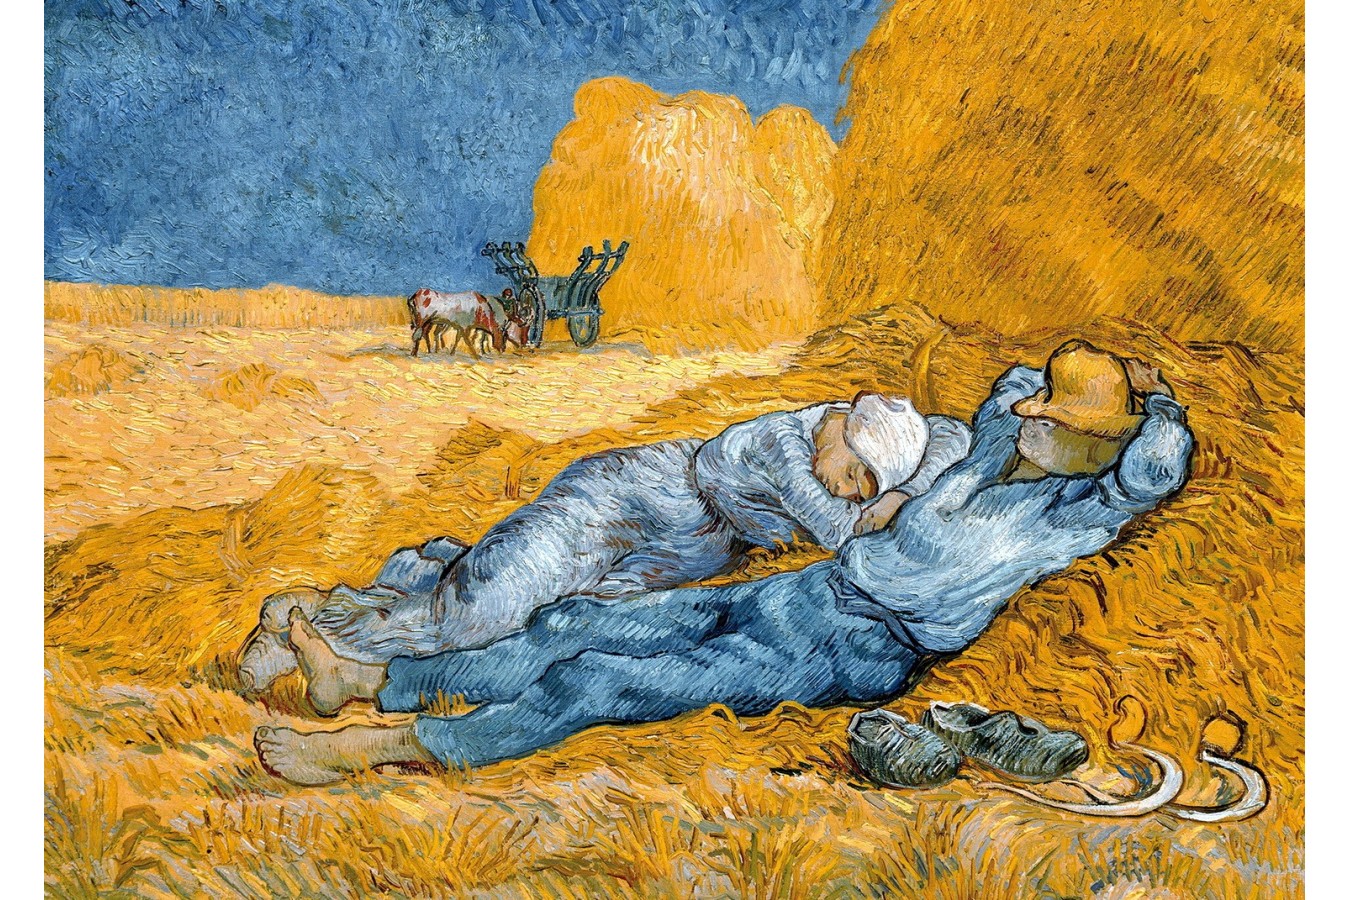 Puzzle TinyPuzzle - Vincent Van Gogh: Noon Rest from Work (Siesta), 99 piese (1017) imagine